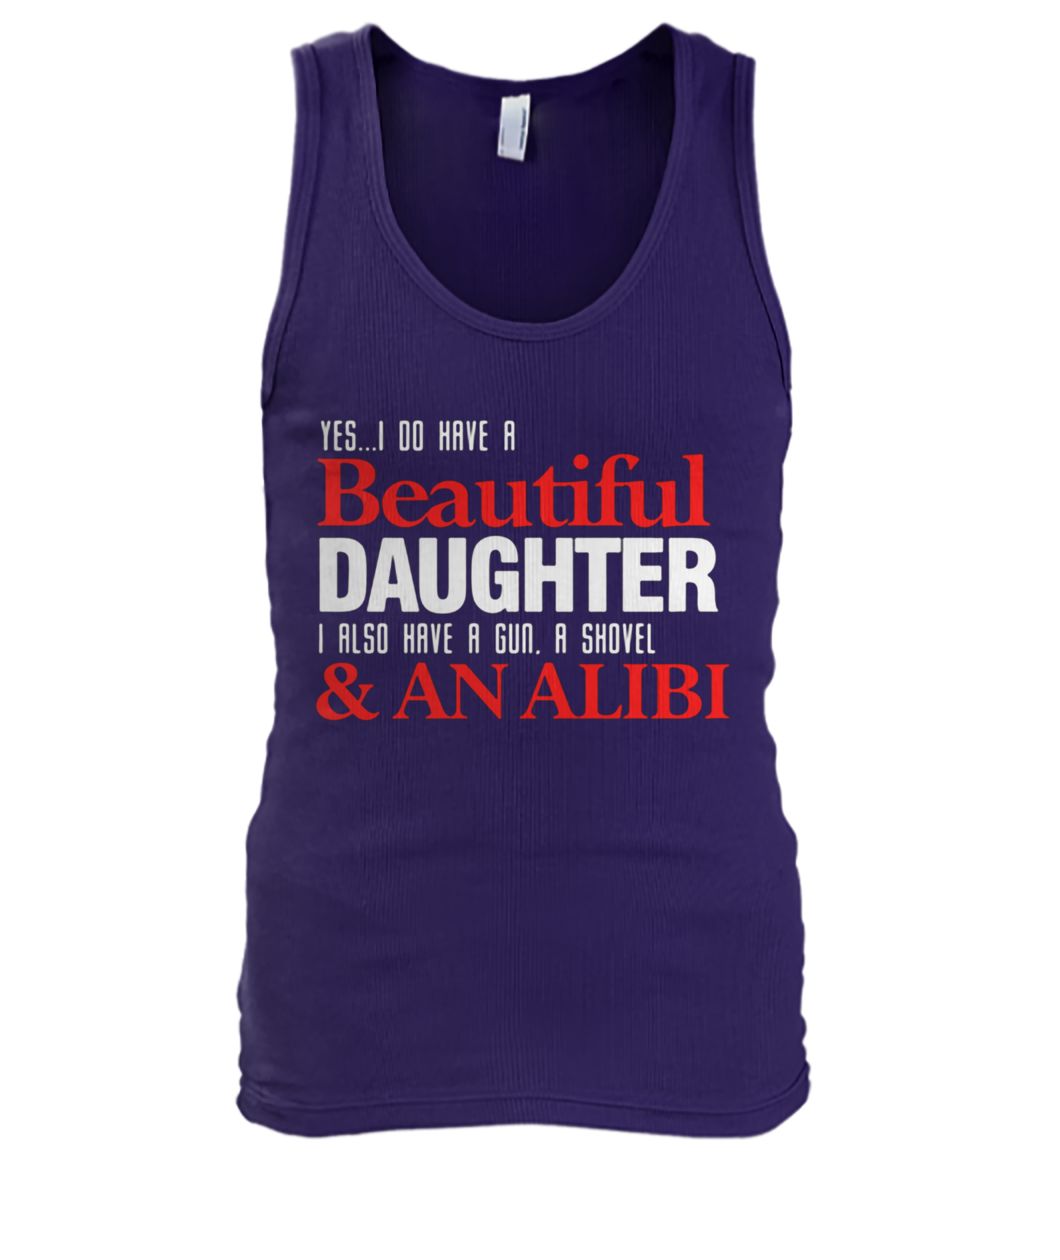 Yes I do have a beautiful daughter I also have a gun a shovel and an alibi tank top